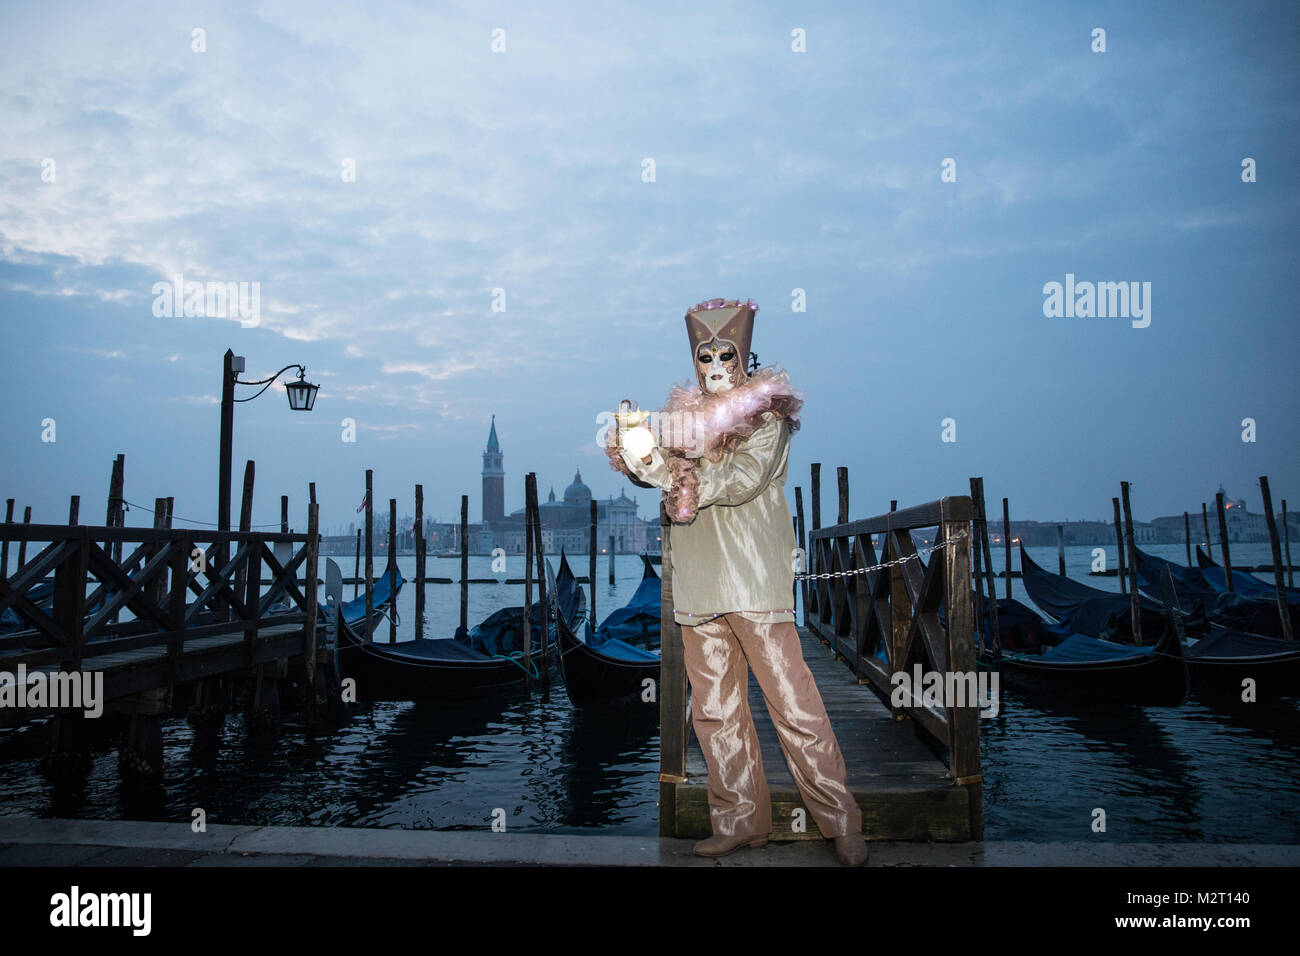 Venice, Italy 8th February, 2018. People in costumes pose by St Mark's Square early morning during Venice Carnival. Credit: Carol Moir / Alamy Live News. Stock Photo